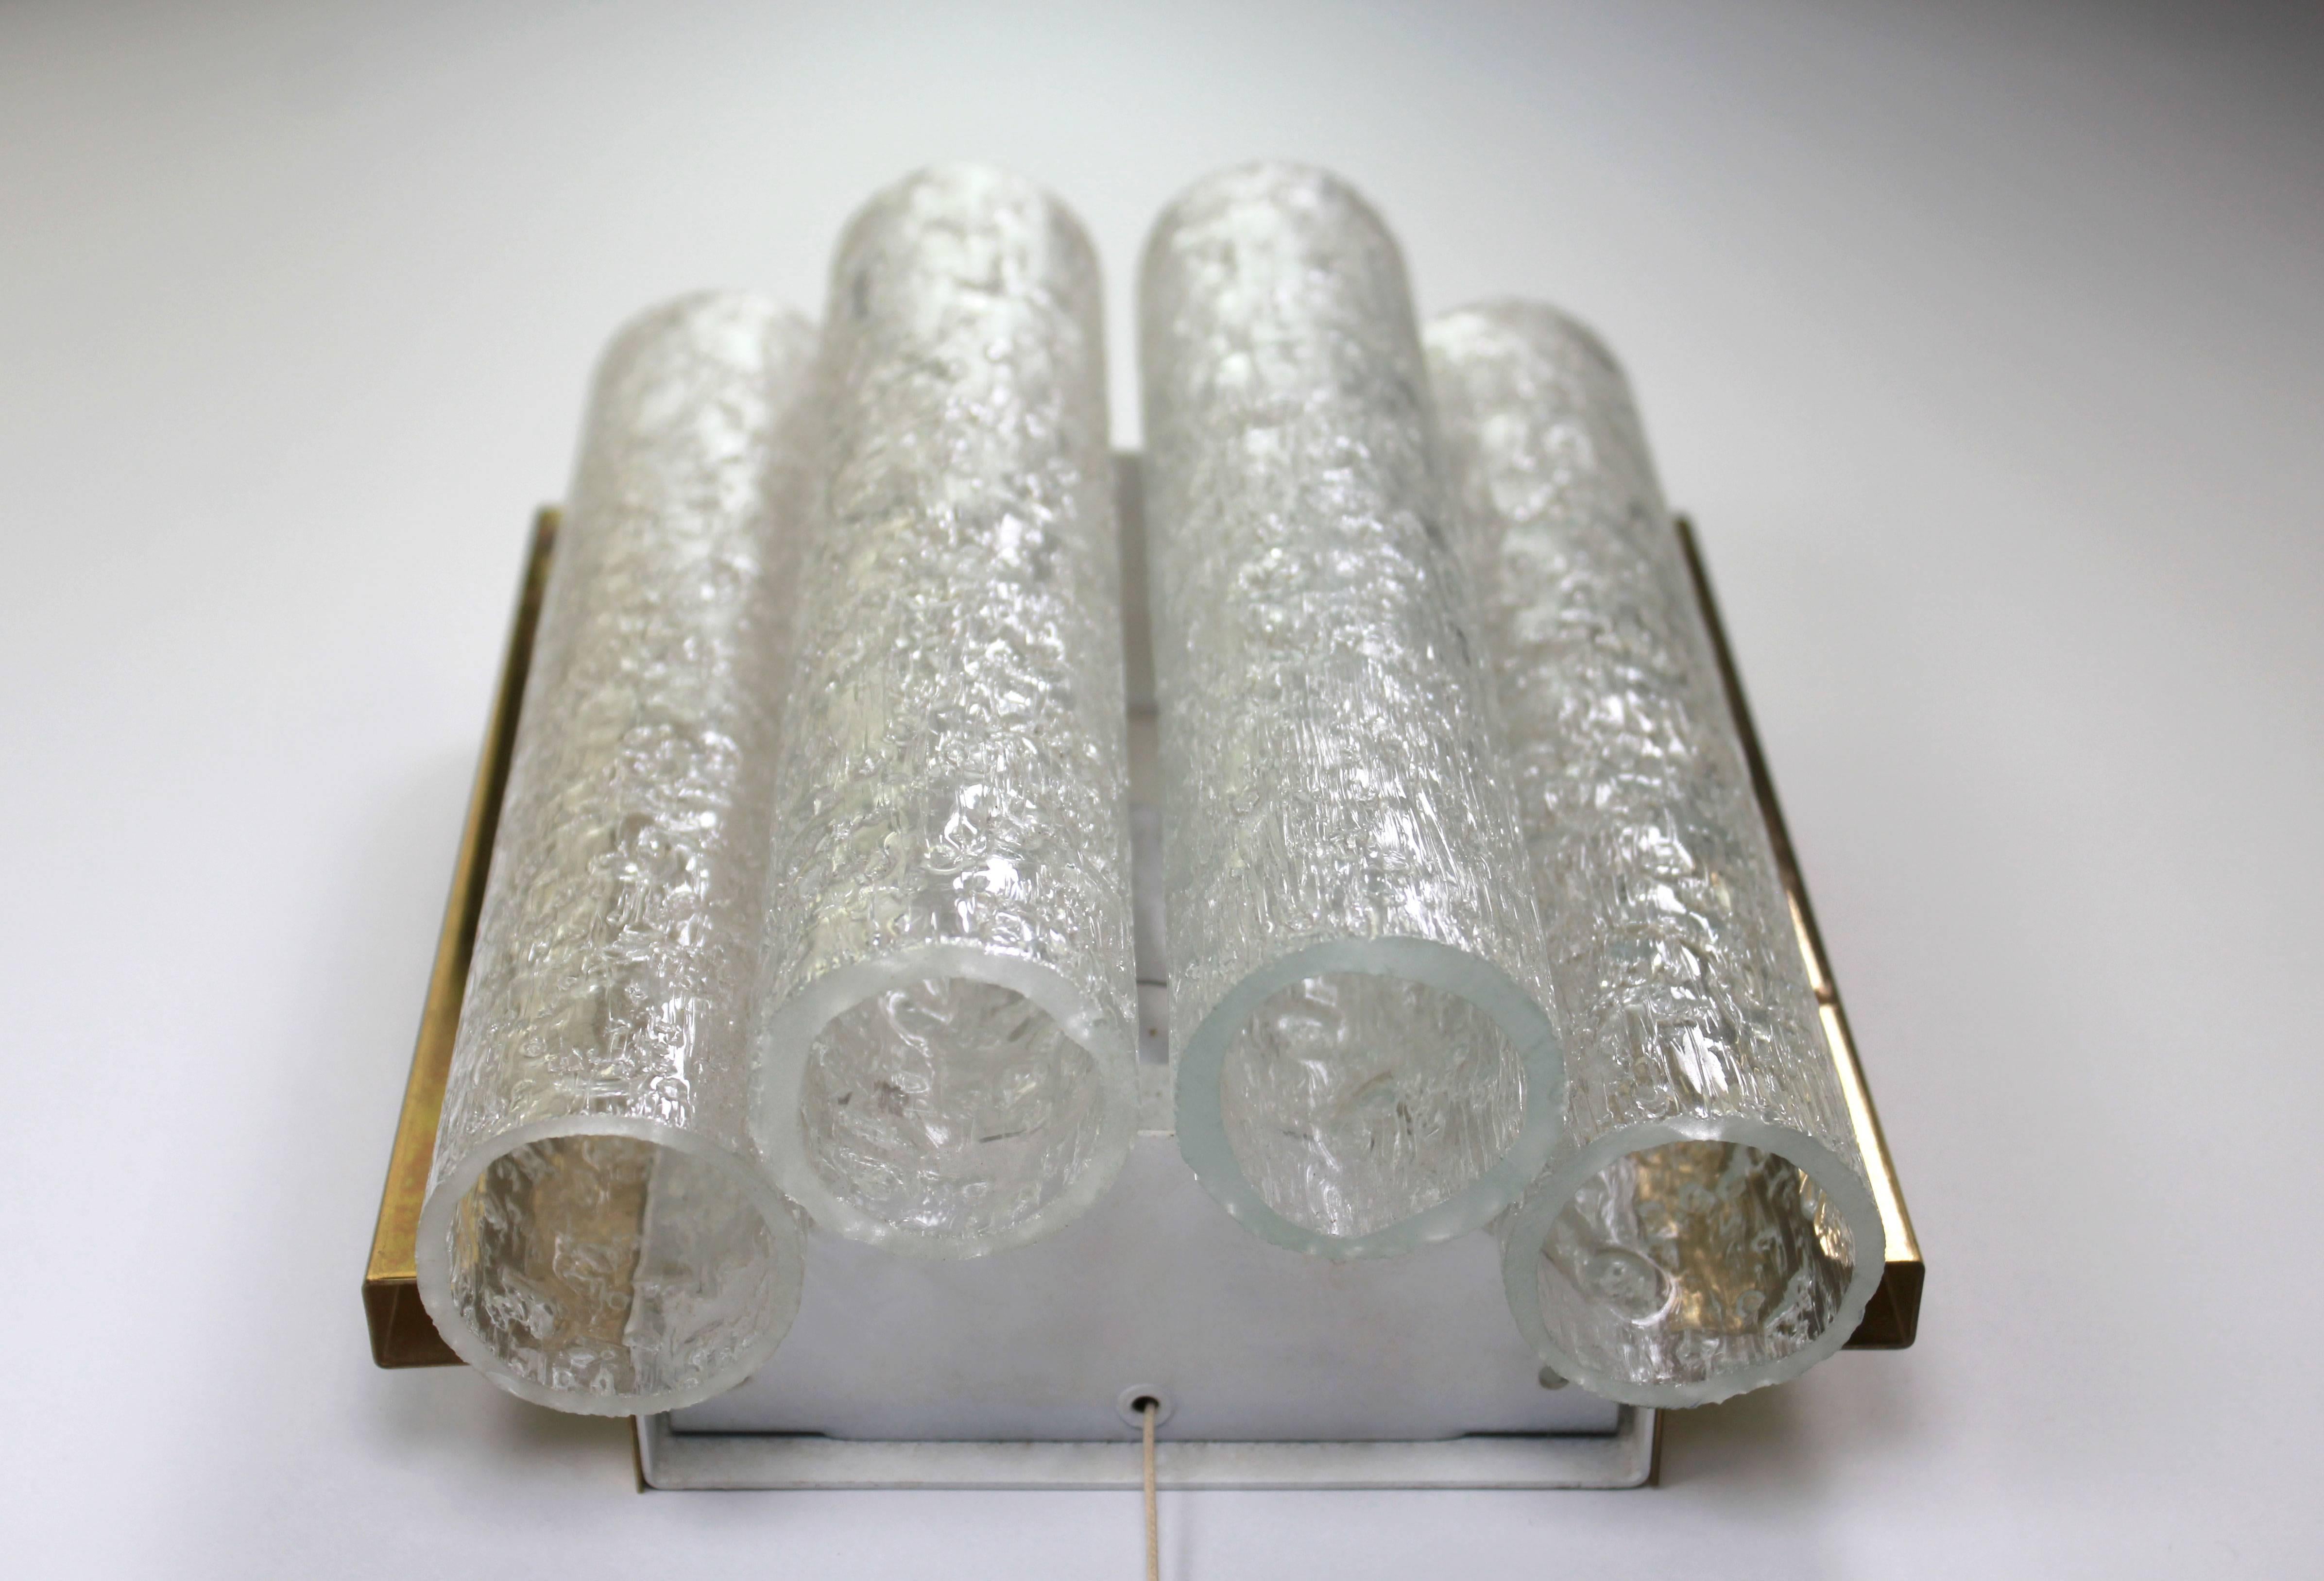 Elegant German Mid-Century Modern wall light with four clear textured Murano ice glass tubes. Brass sides and white lacquered metal mount. Manufactured by German Doria Leuchten in the 1960s. Original pull switch that works perfectly. Model 2210/10.